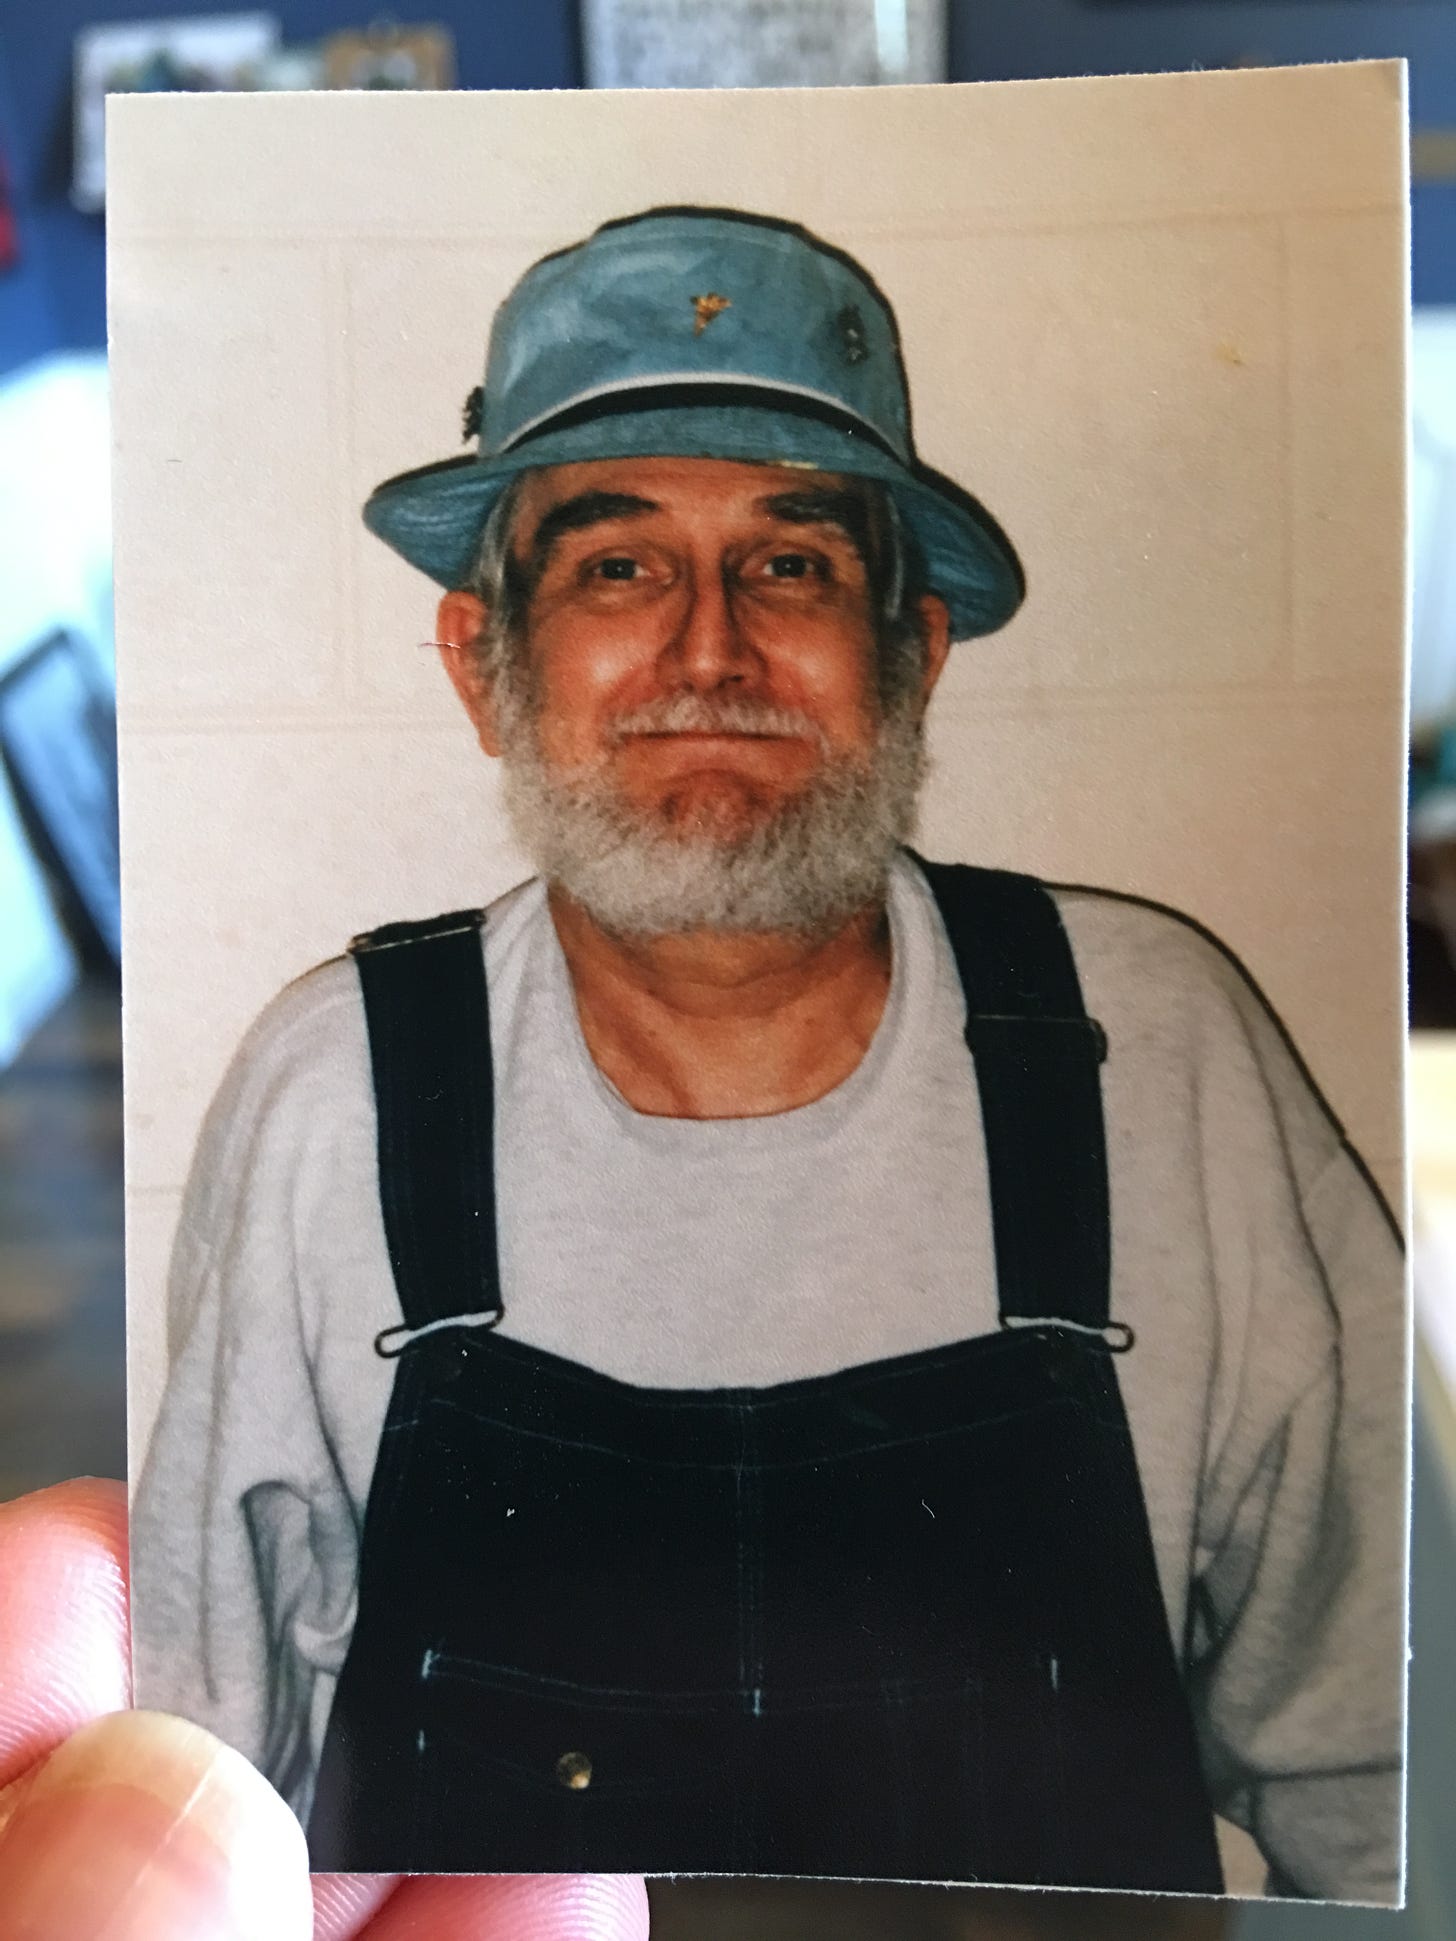 JR stands against a light tan wall, wearing black overalls and a gray sweatshirt. He has a turquoise bucket hat and his smiling lips are closed. He has dark black bushy eyebrows, and interestingly opposite white beard and hair.